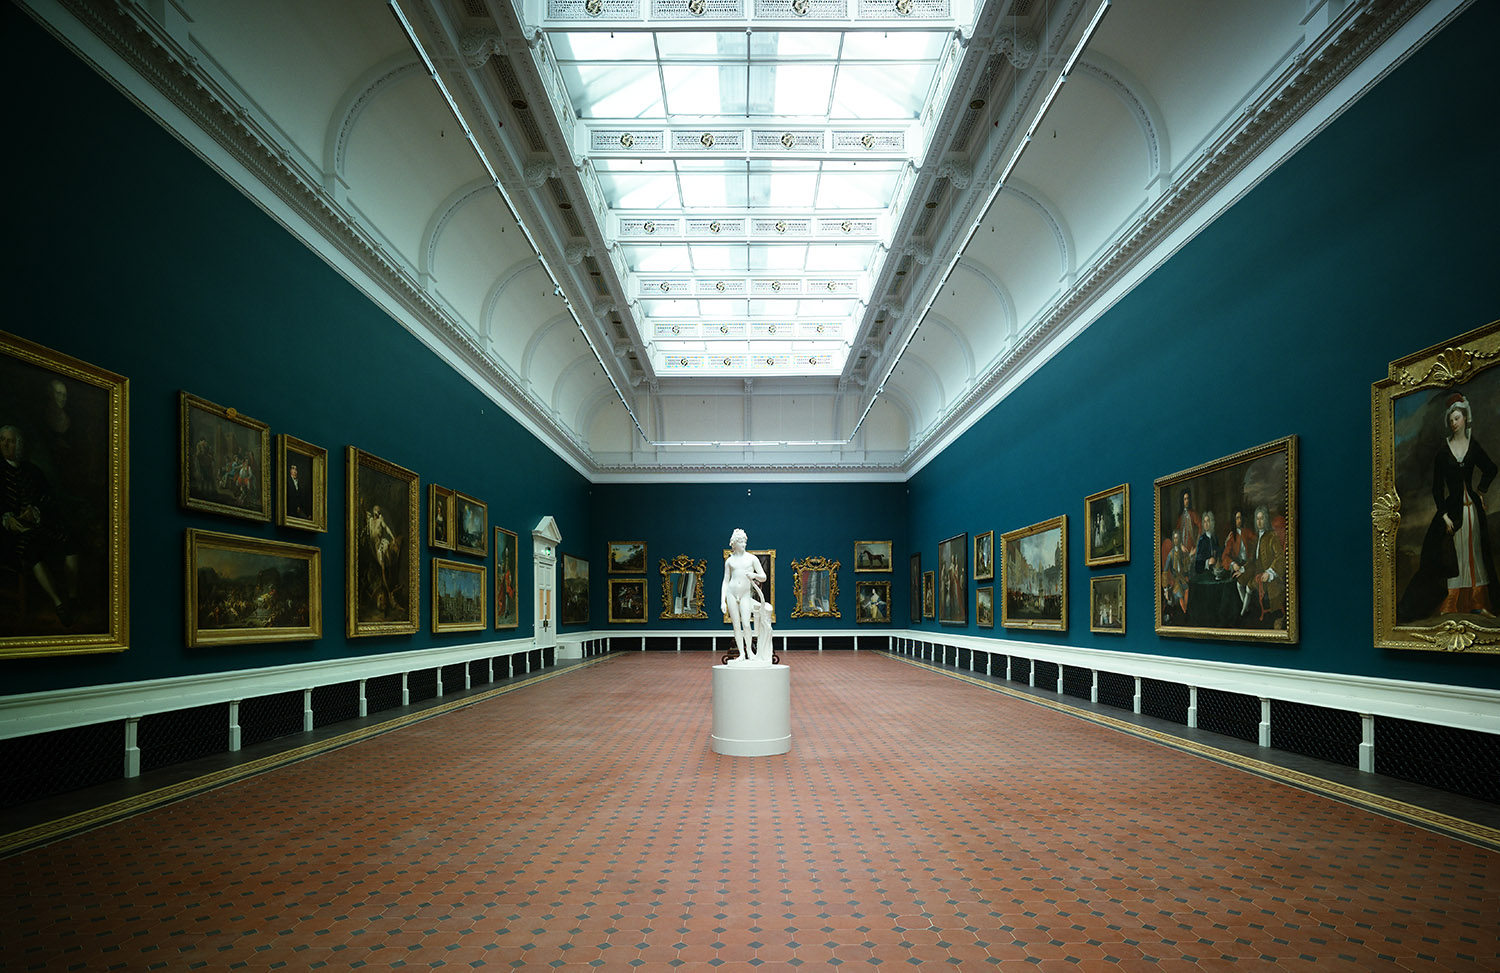 heneghan peng architects - National Gallery of Ireland: Historic